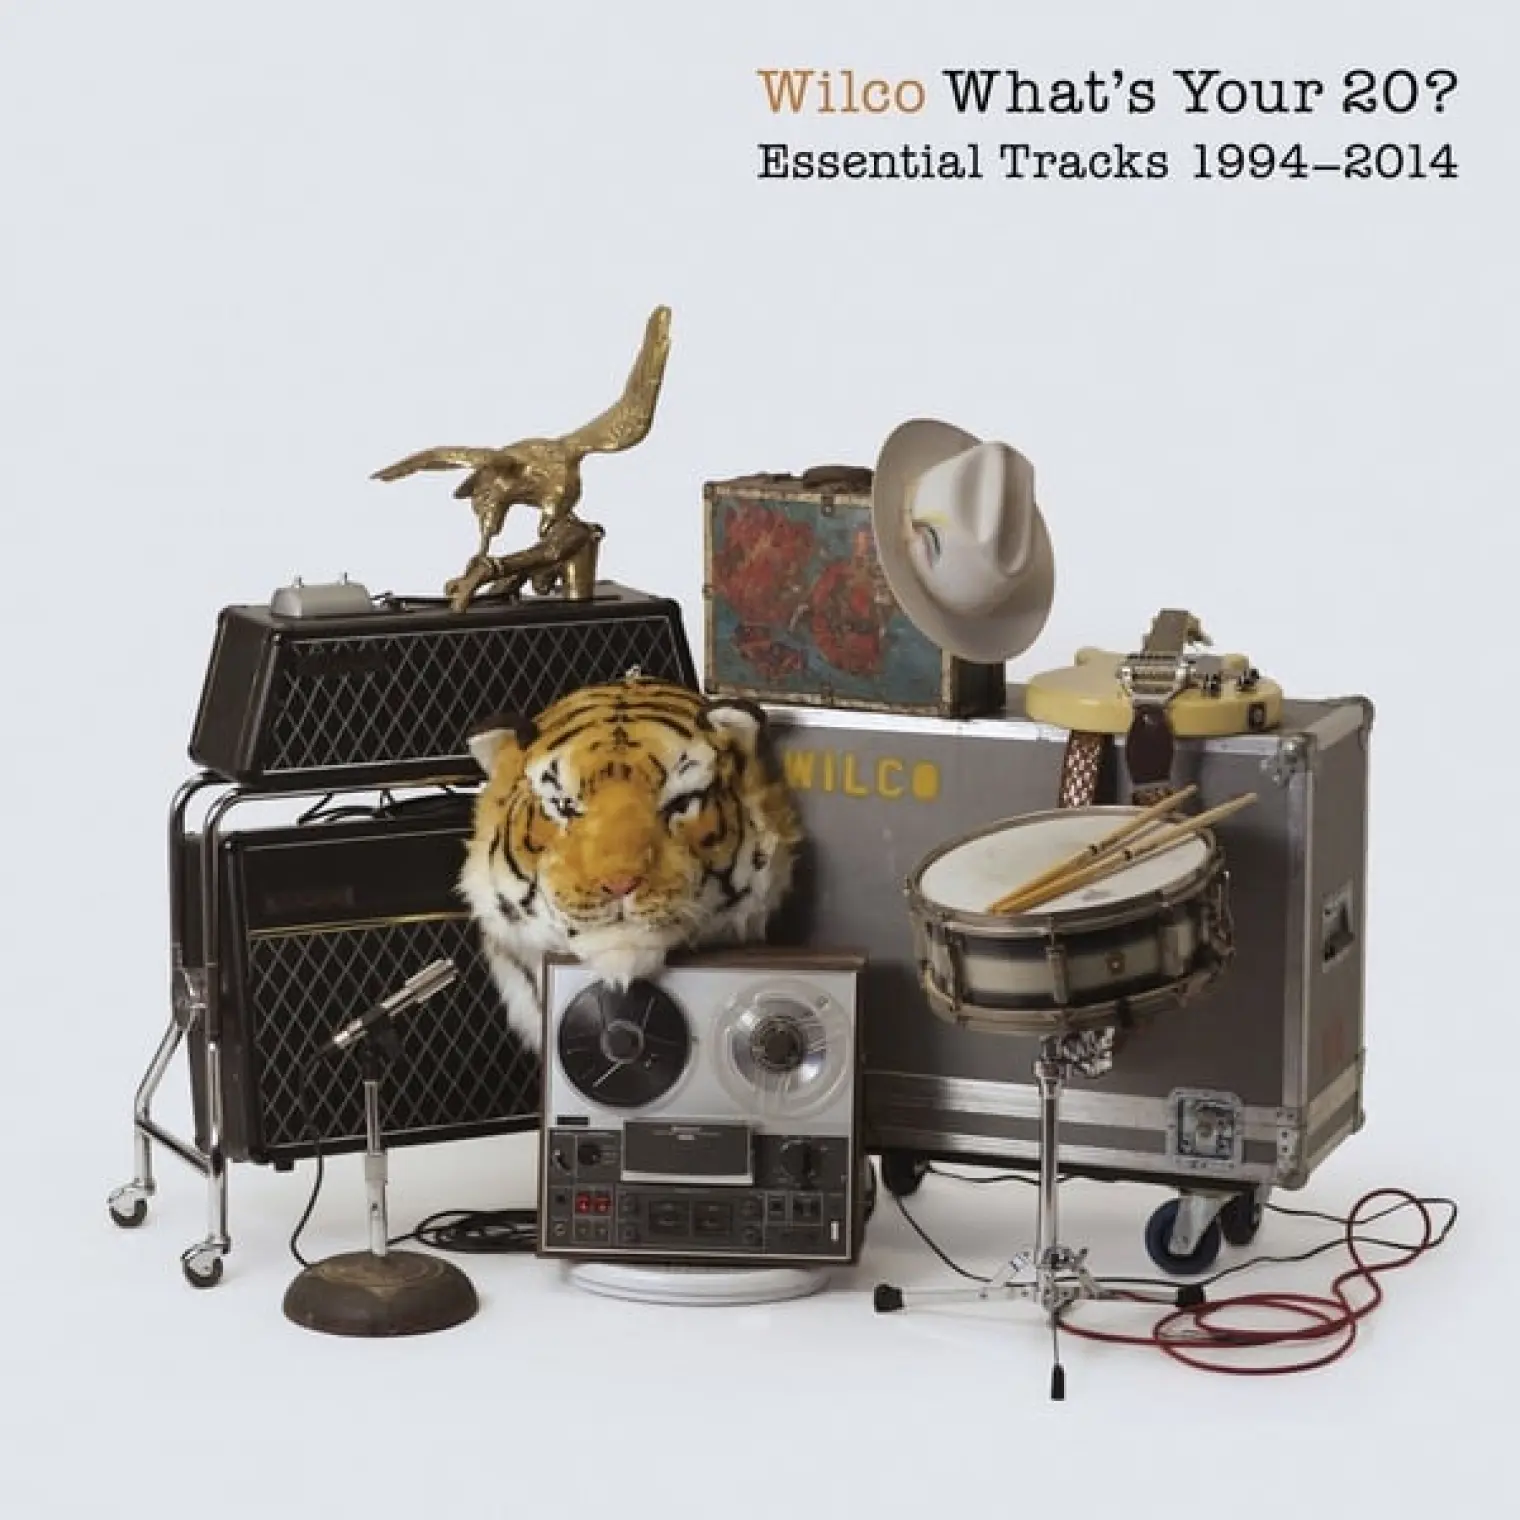 What's Your 20? Essential Tracks 1994 - 2014 -  Wilco 